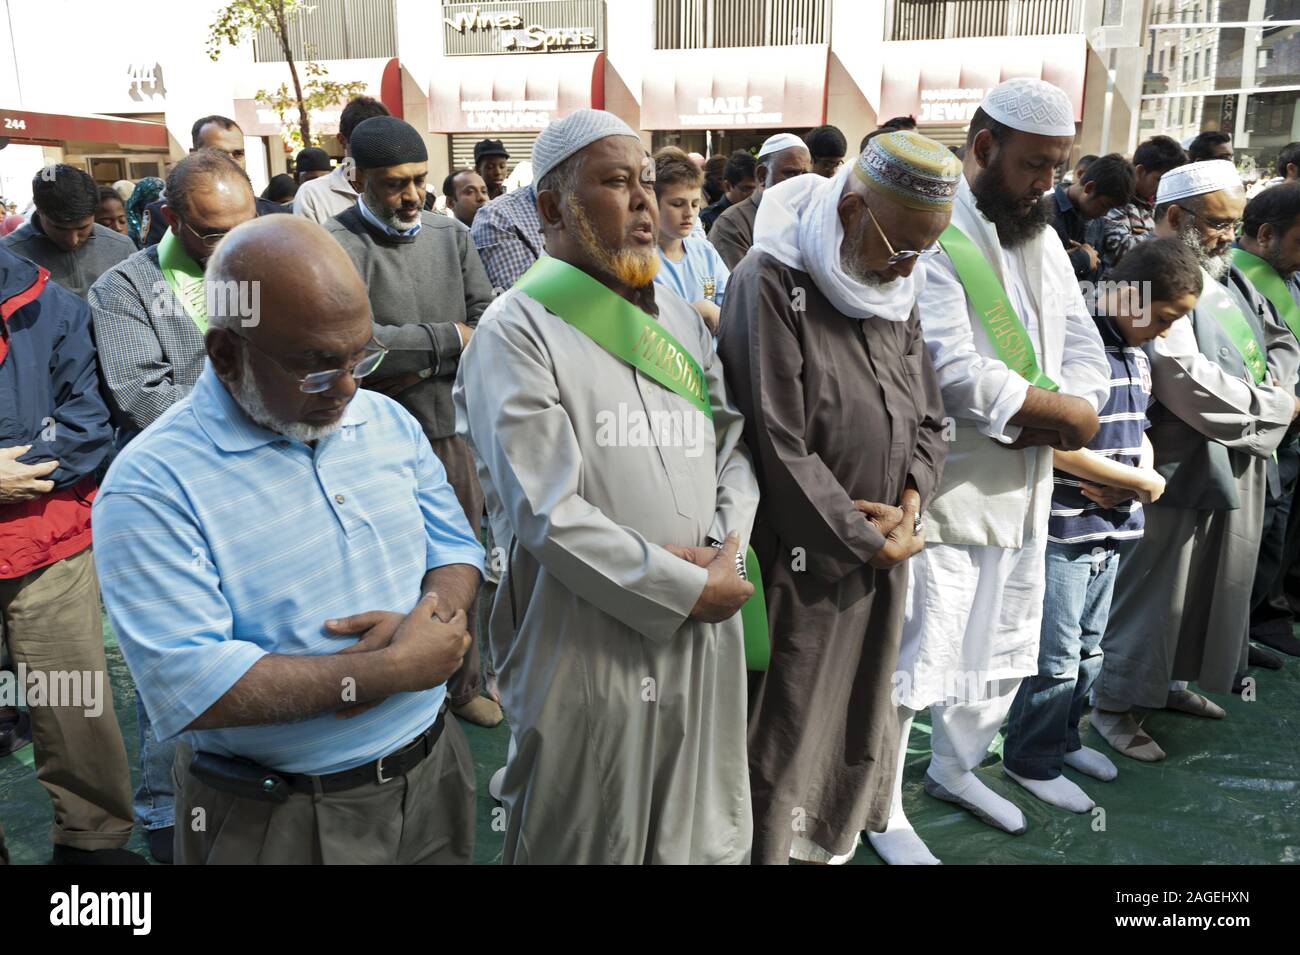 Muslim Day Parade in New York City, 2012. Stock Photo